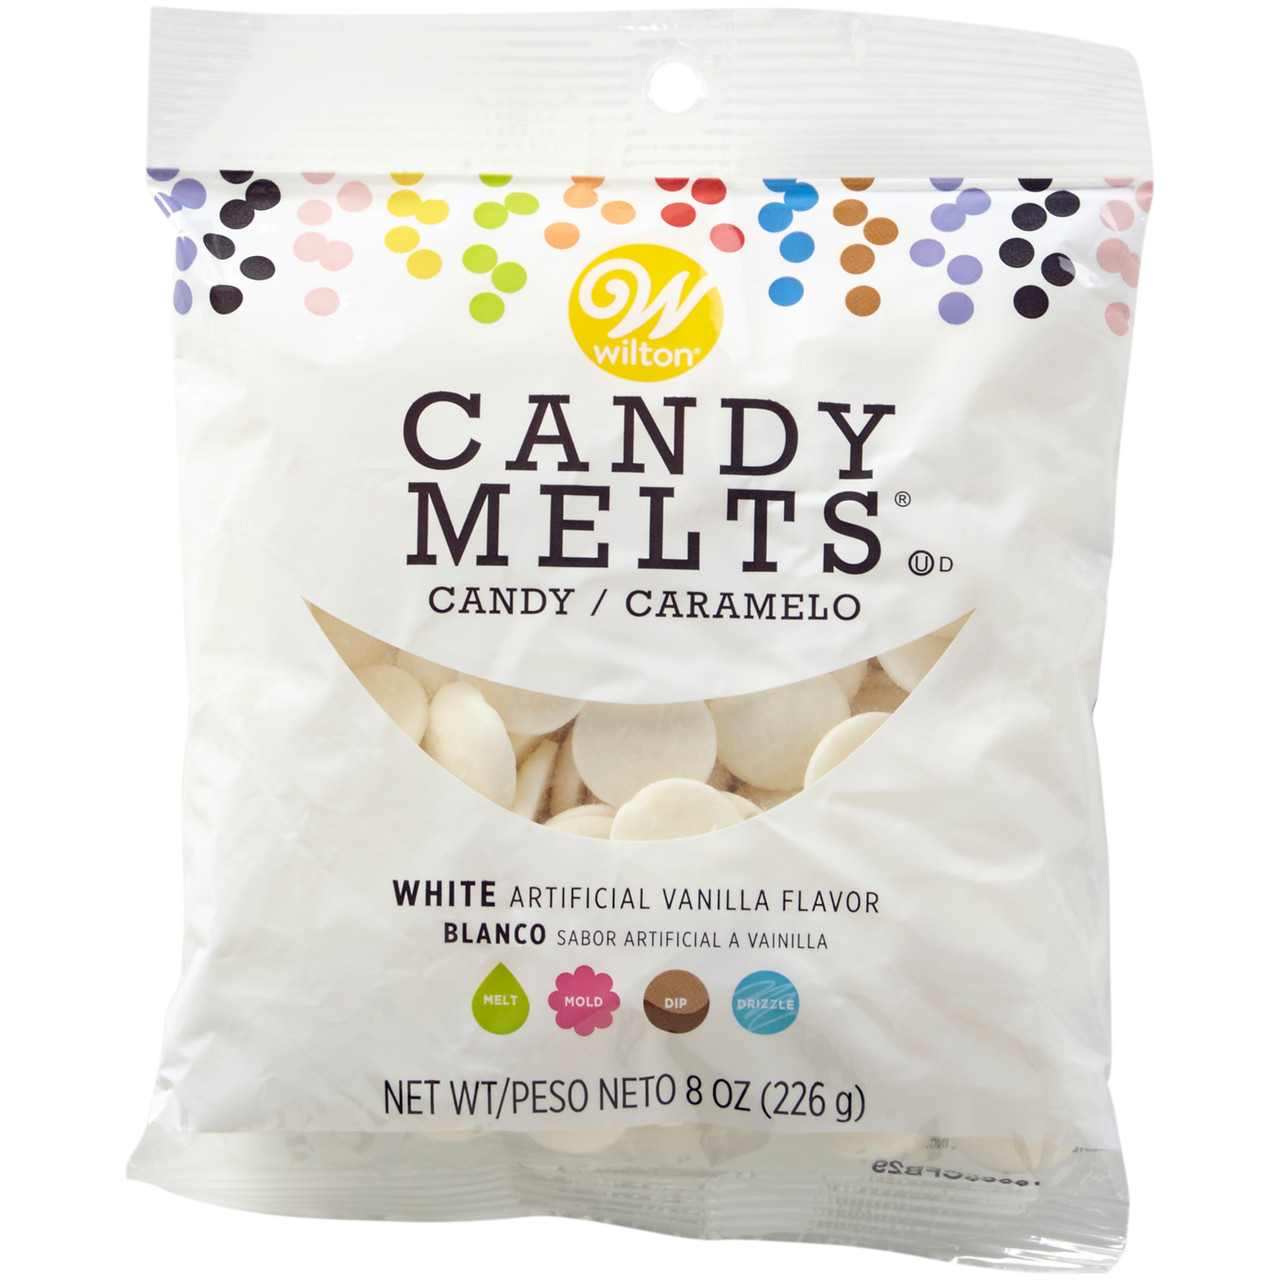 CANDY MELTS BRITE WHITE 12 OZ - Cake Supplies for Less